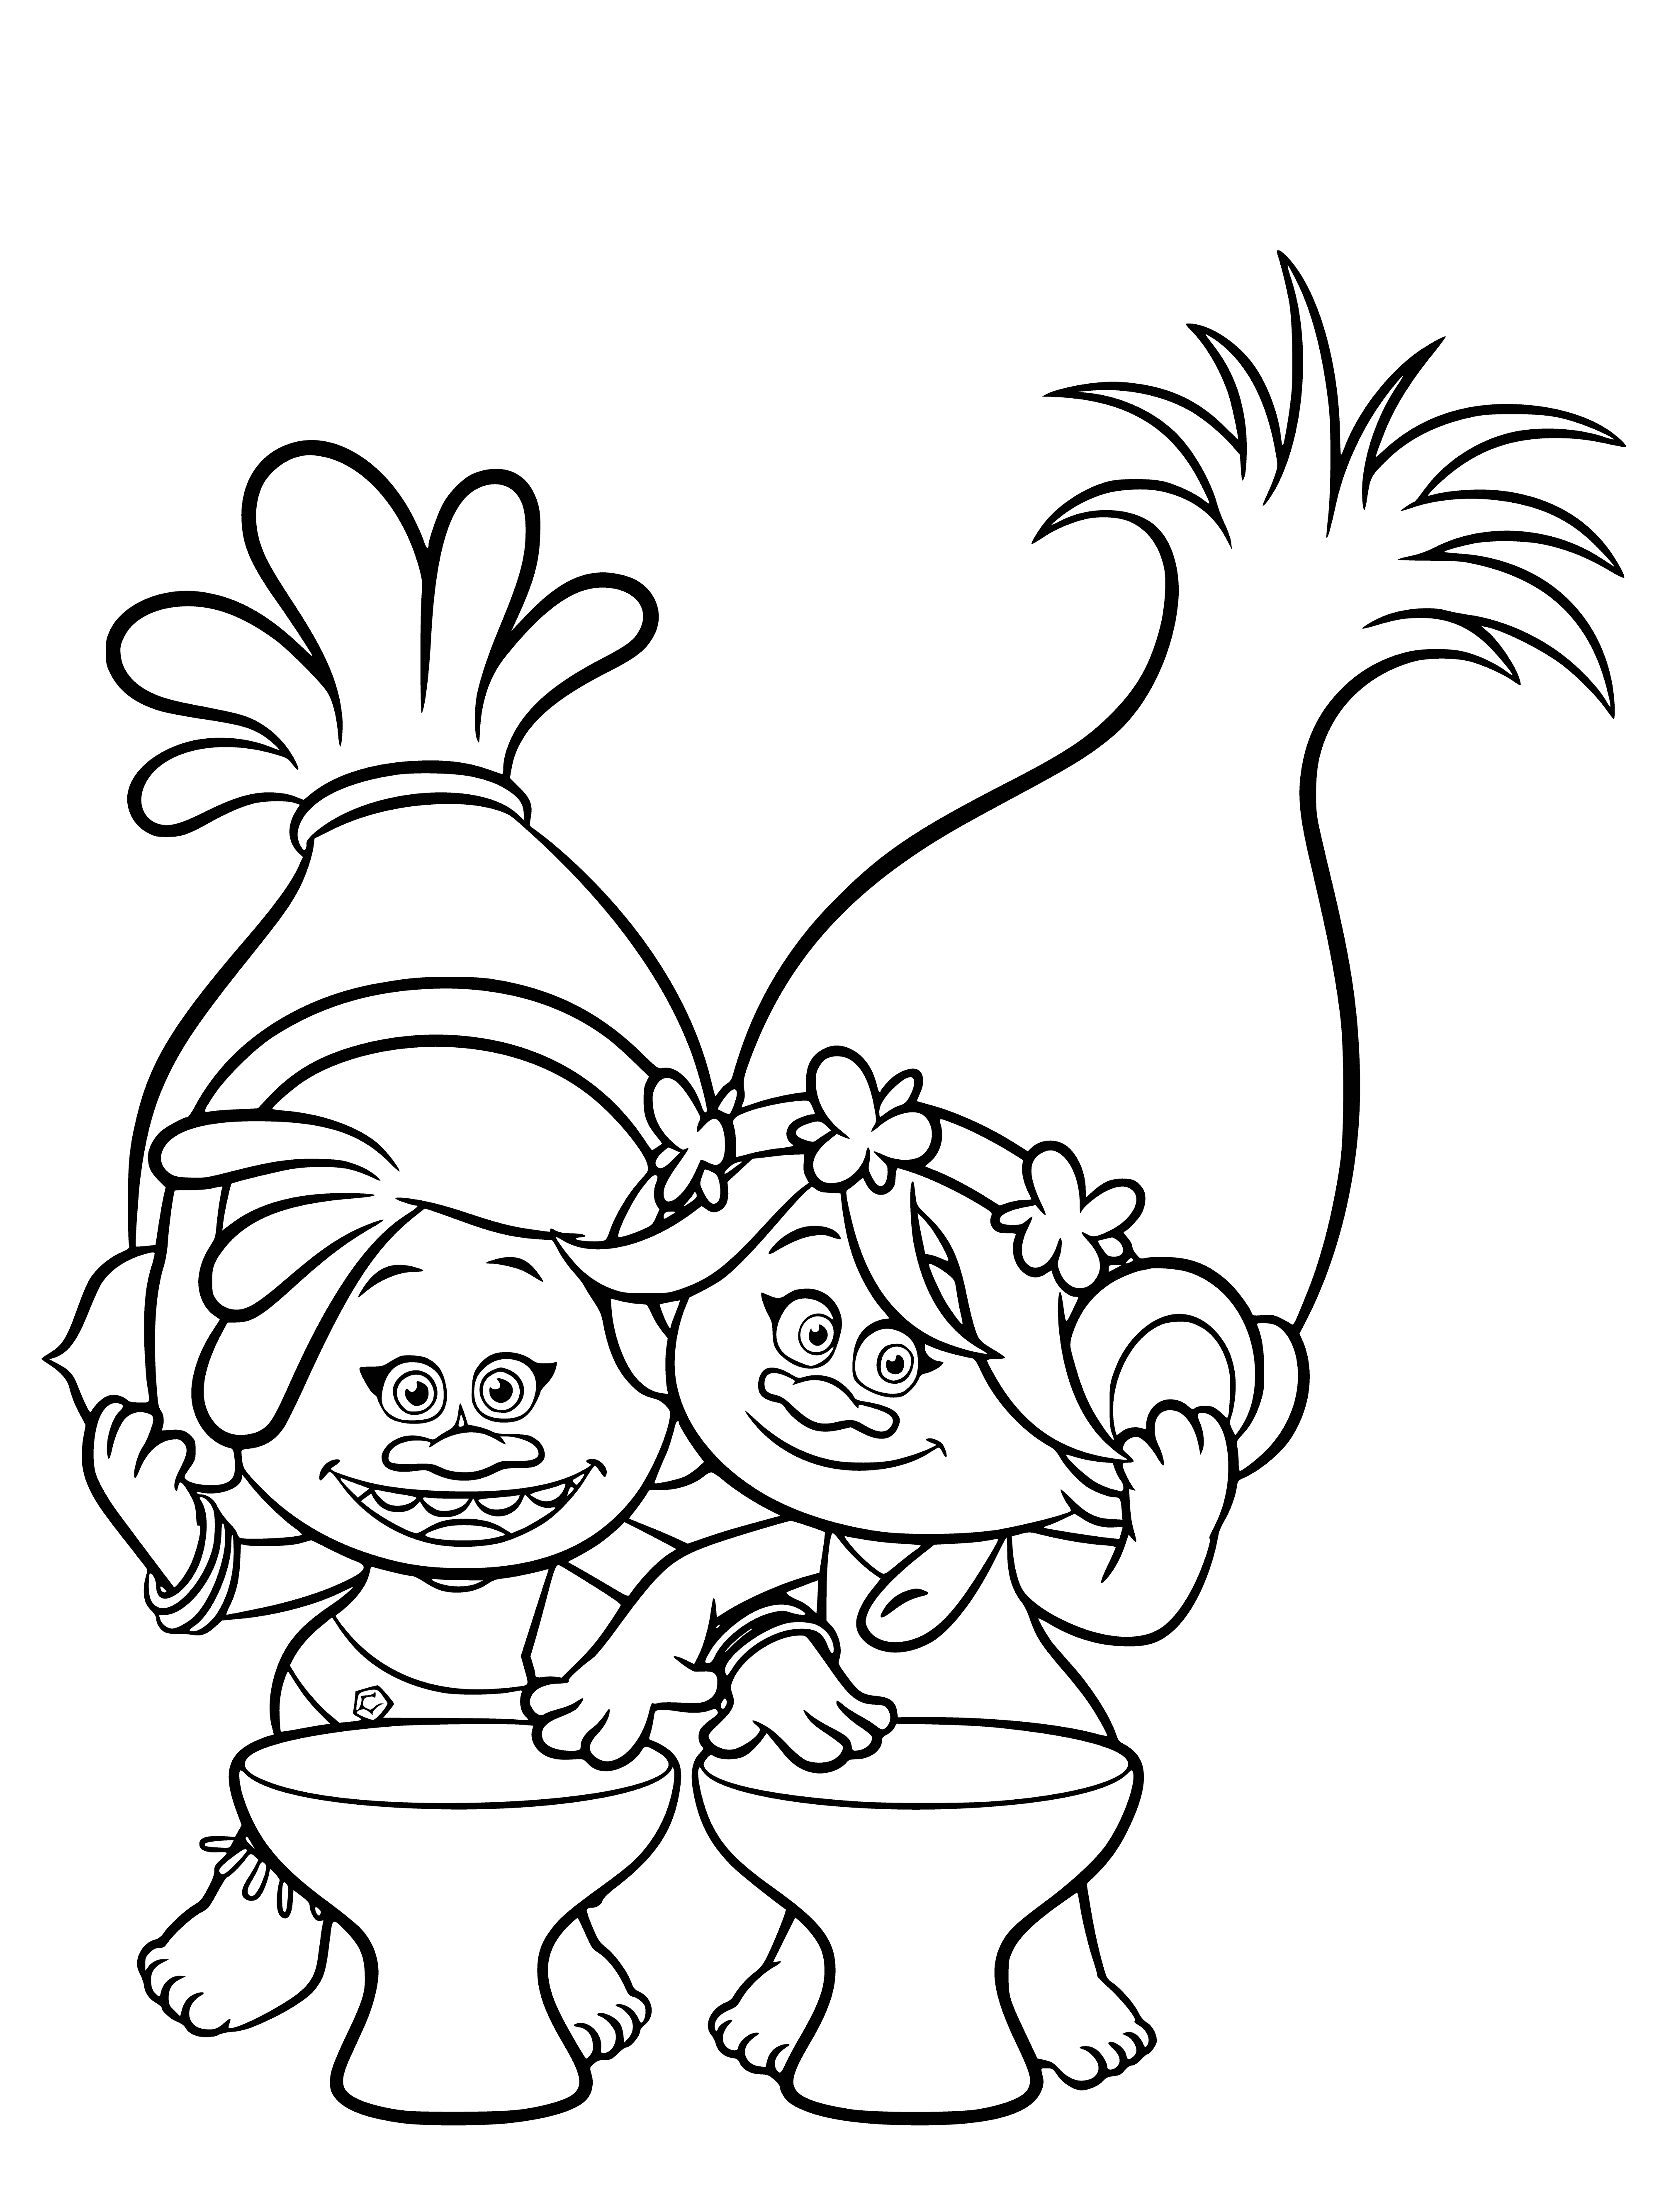 coloring page: Two trolls: one purple haired, wearing a headset & heart necklace; the other yellow haired with a crown & wand, both looking at each other.